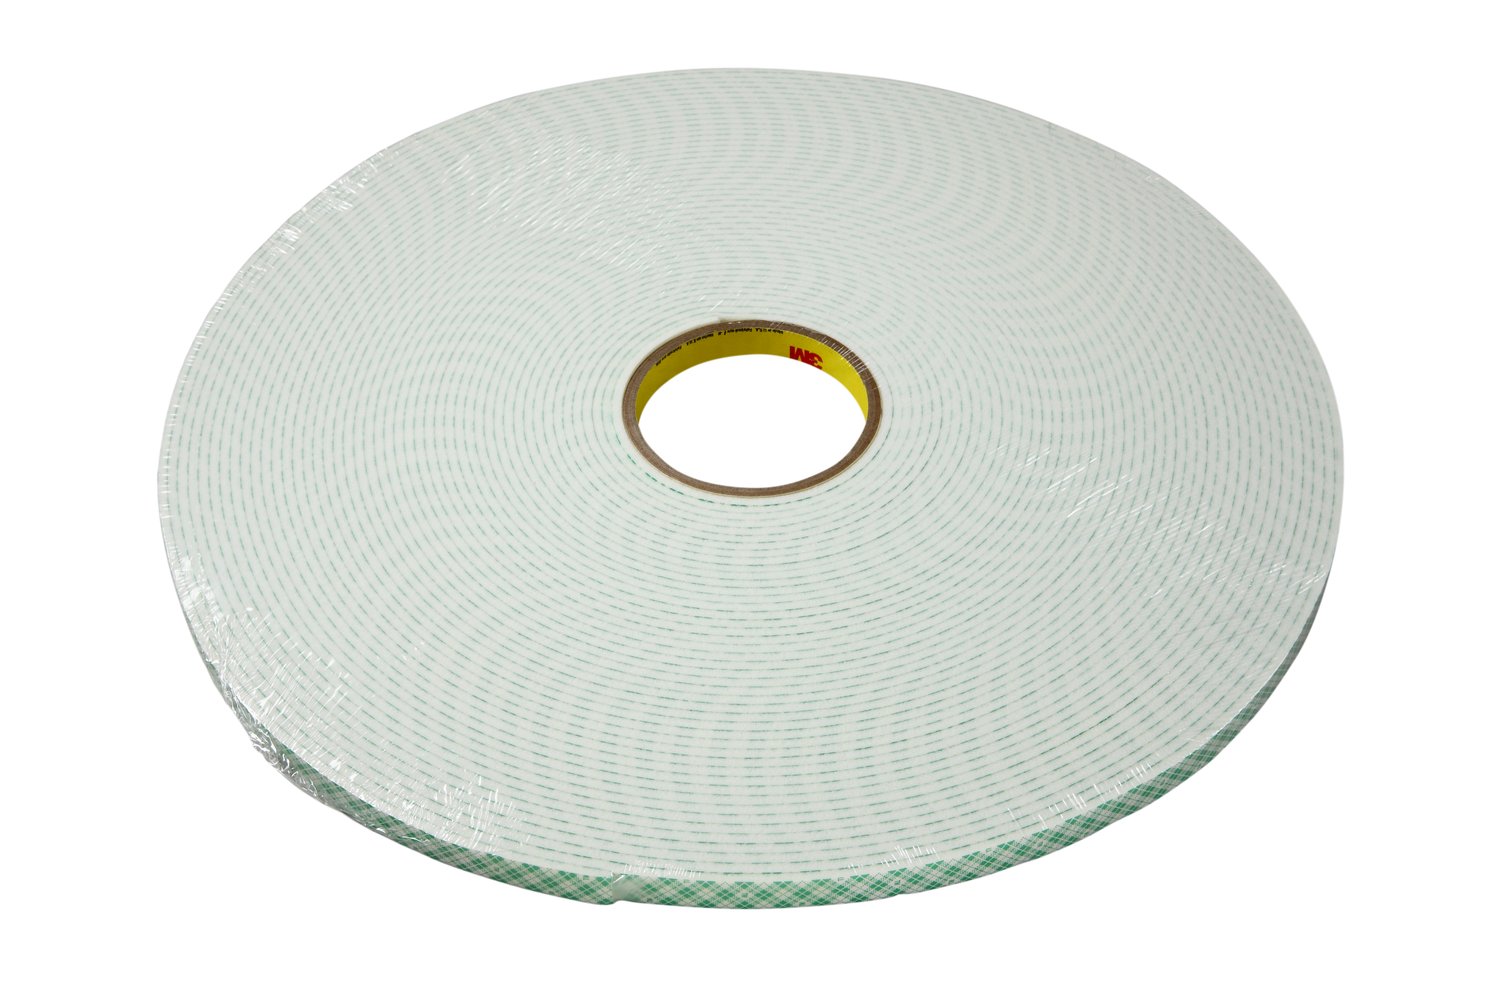 7000122492 - 3M Double Coated Urethane Foam Tape 4004, Off White, 3/8 in x 18 yd,
250 mil, 24 rolls per case